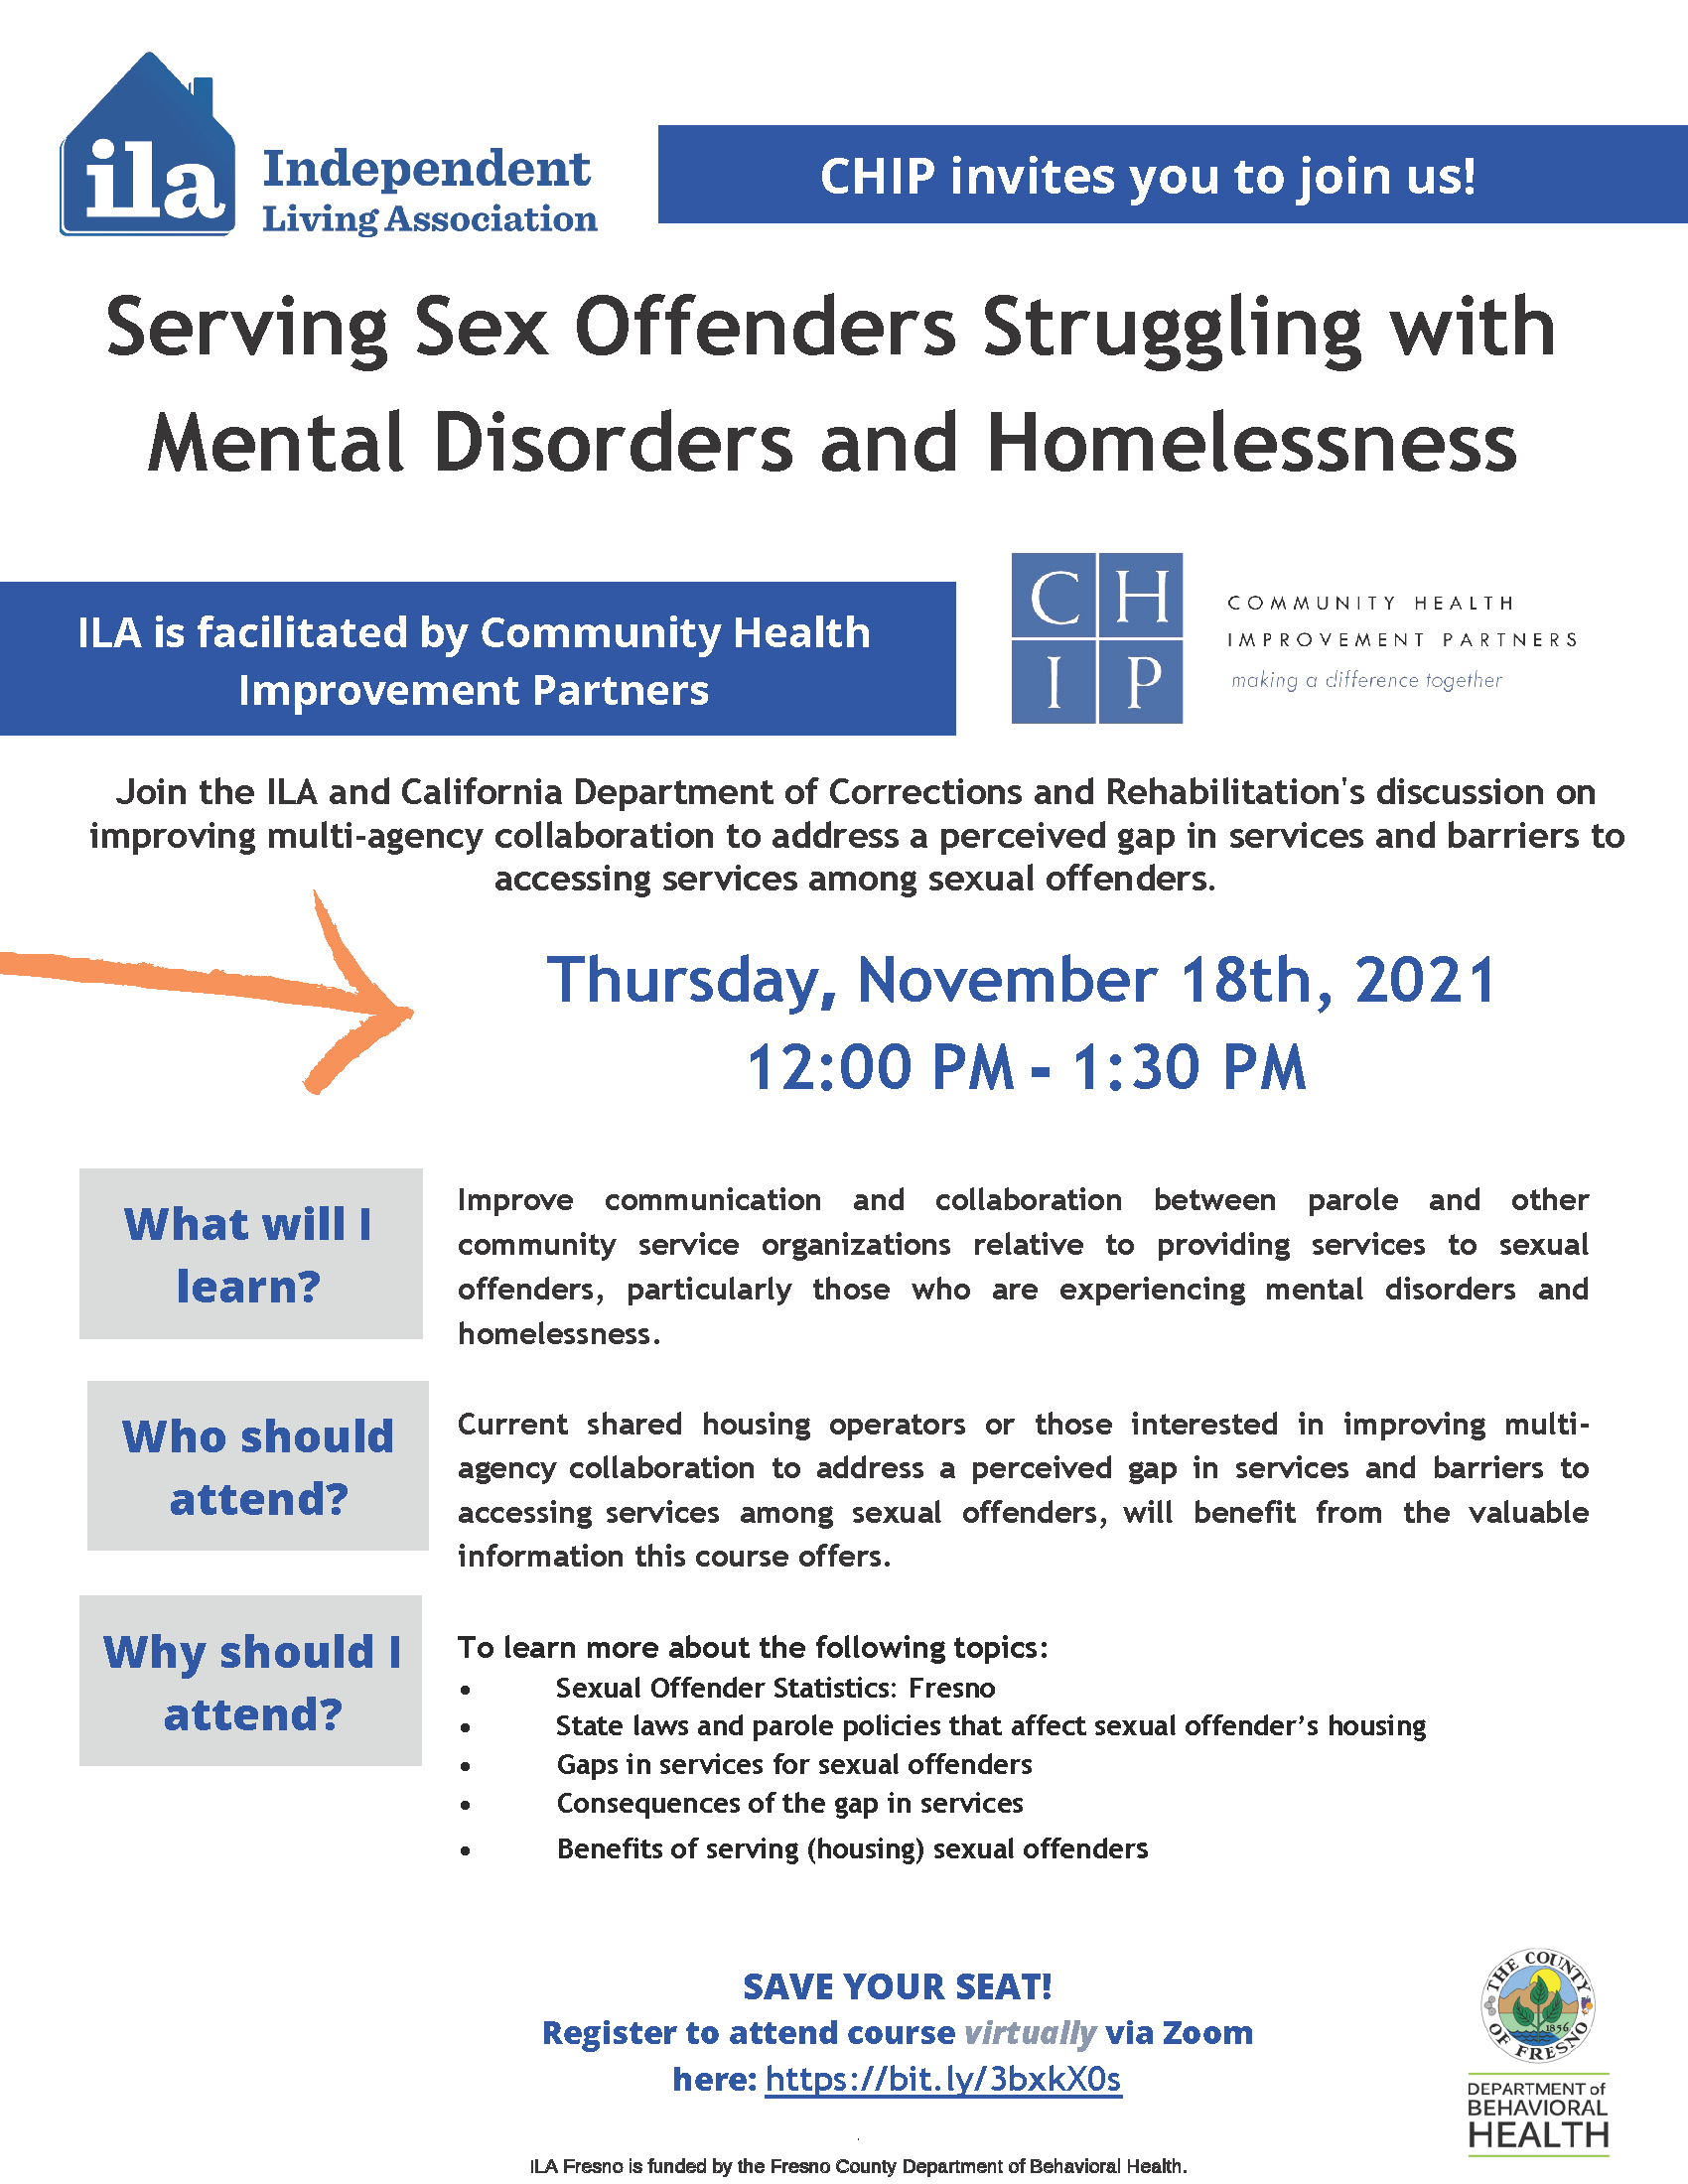 Serving Sex Offenders Struggling with Mental Disorders and Homelessness ***ILA MEMBERS ONLY*** - Independent Living Association picture